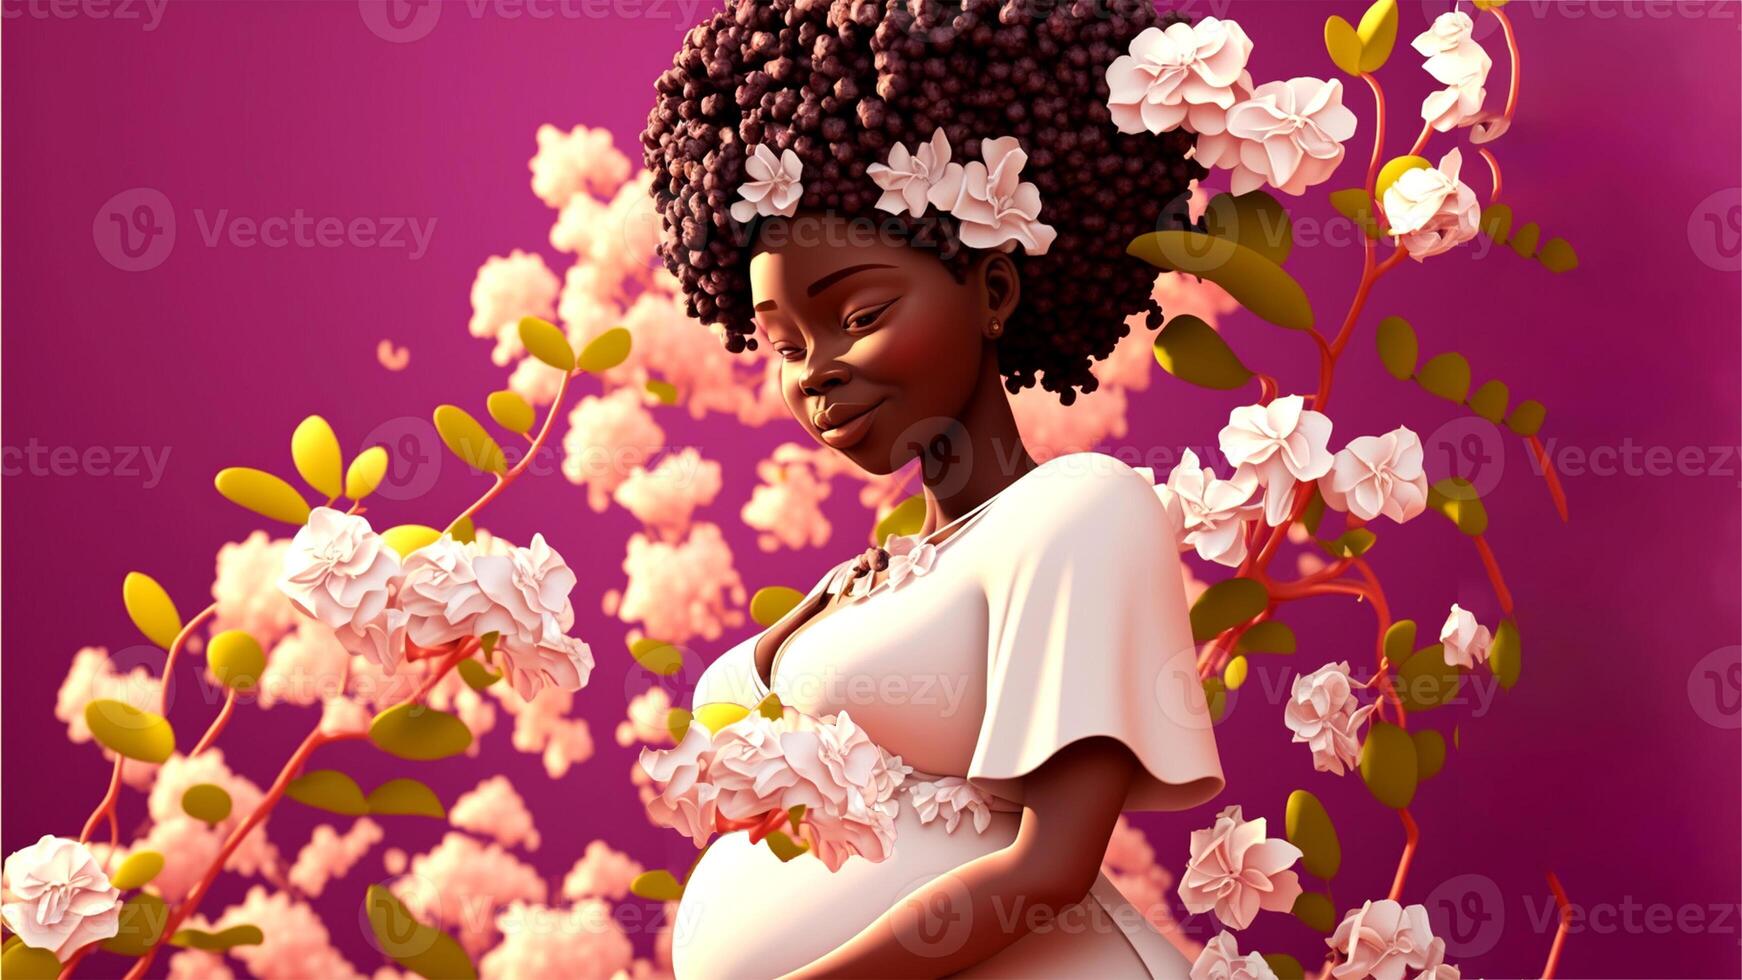 An intimate realistic illustration showing a pregnant woman and surrounded by beautiful flowers, nature, offering an emotion of peace and connection. Generative AI photo